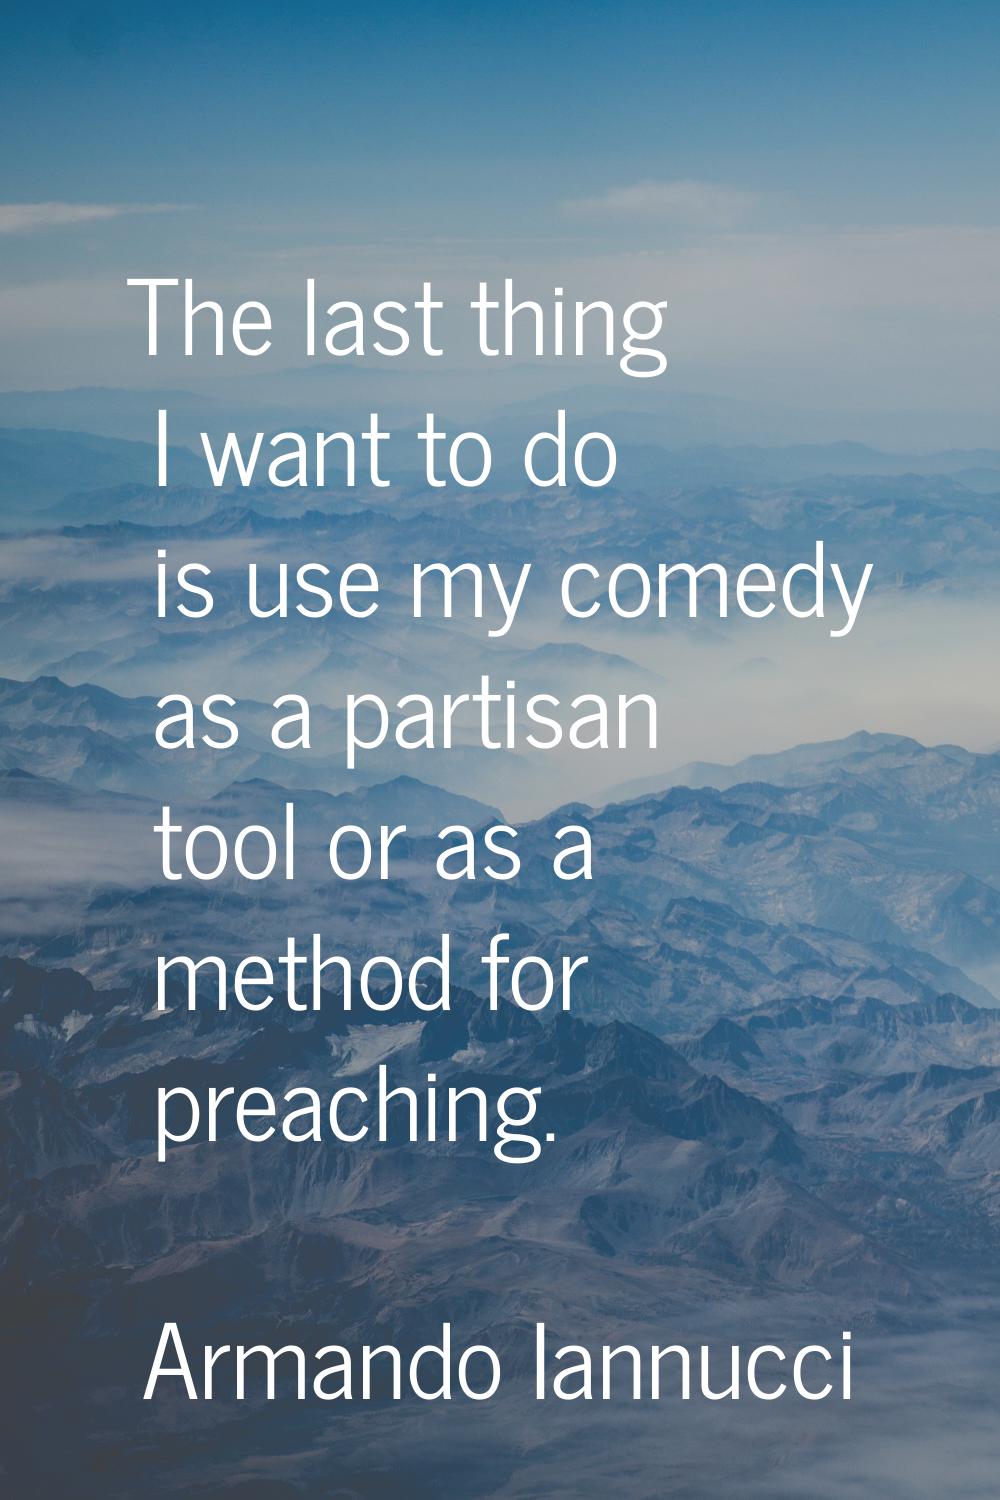 The last thing I want to do is use my comedy as a partisan tool or as a method for preaching.